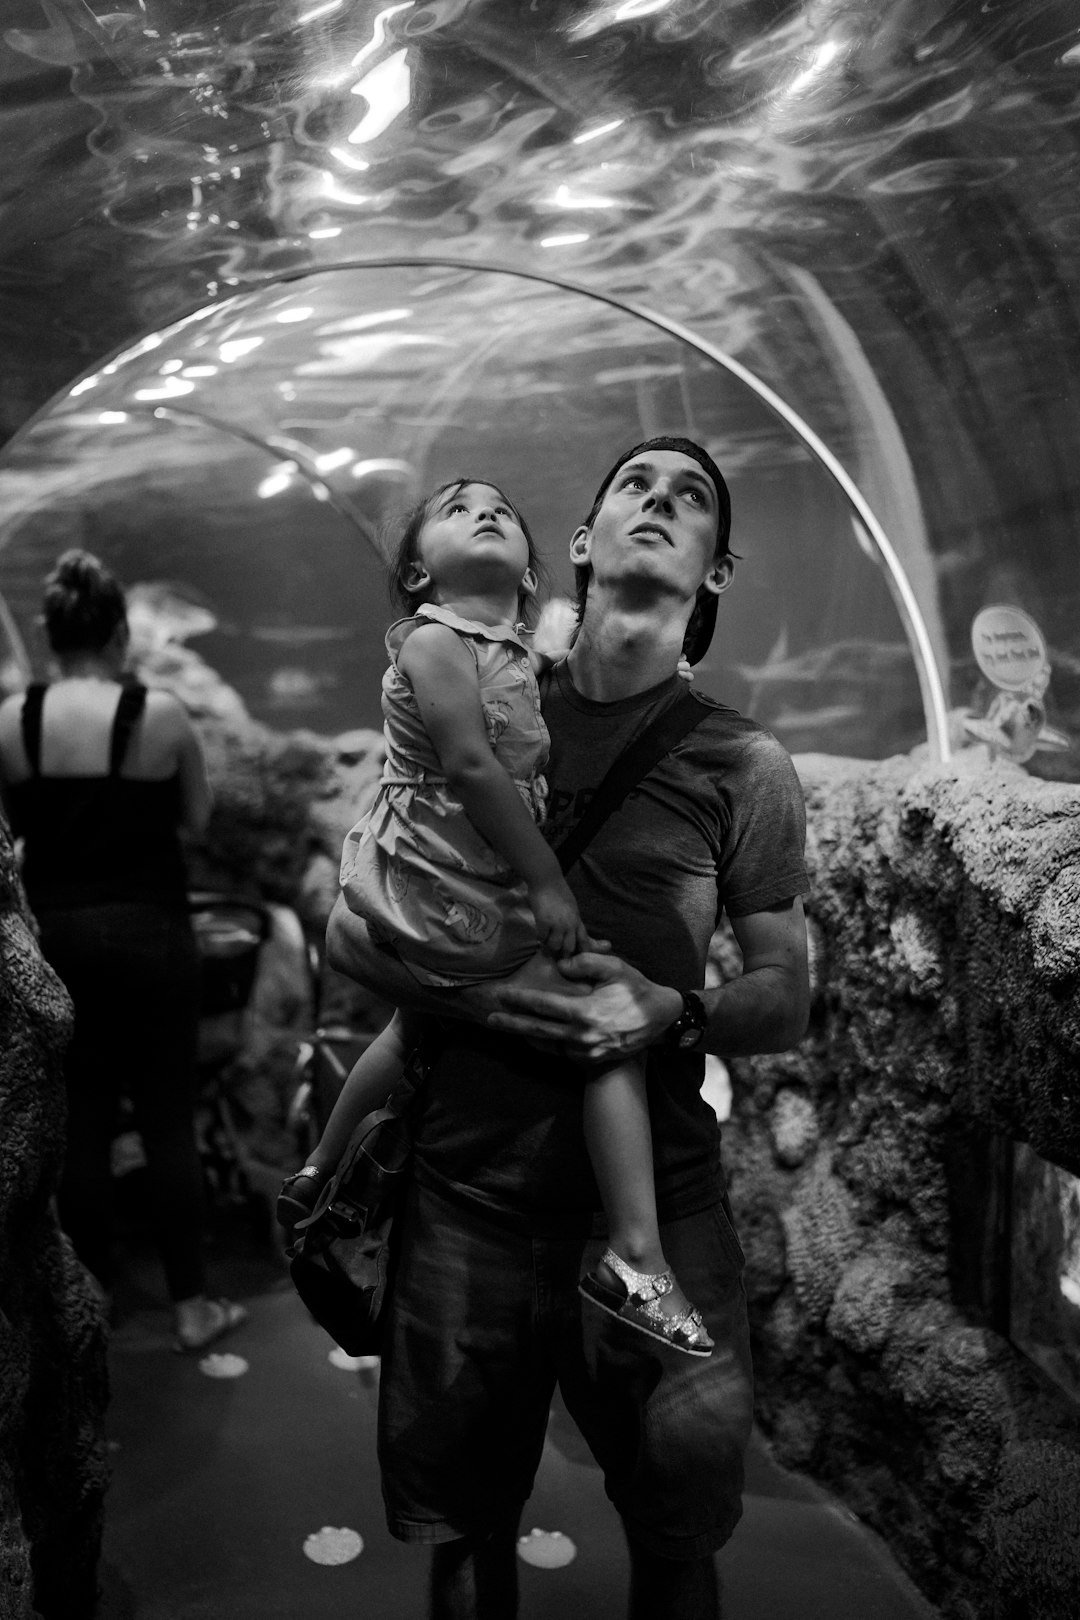 grayscale photography of man carrying a girl inside an aquarium museum